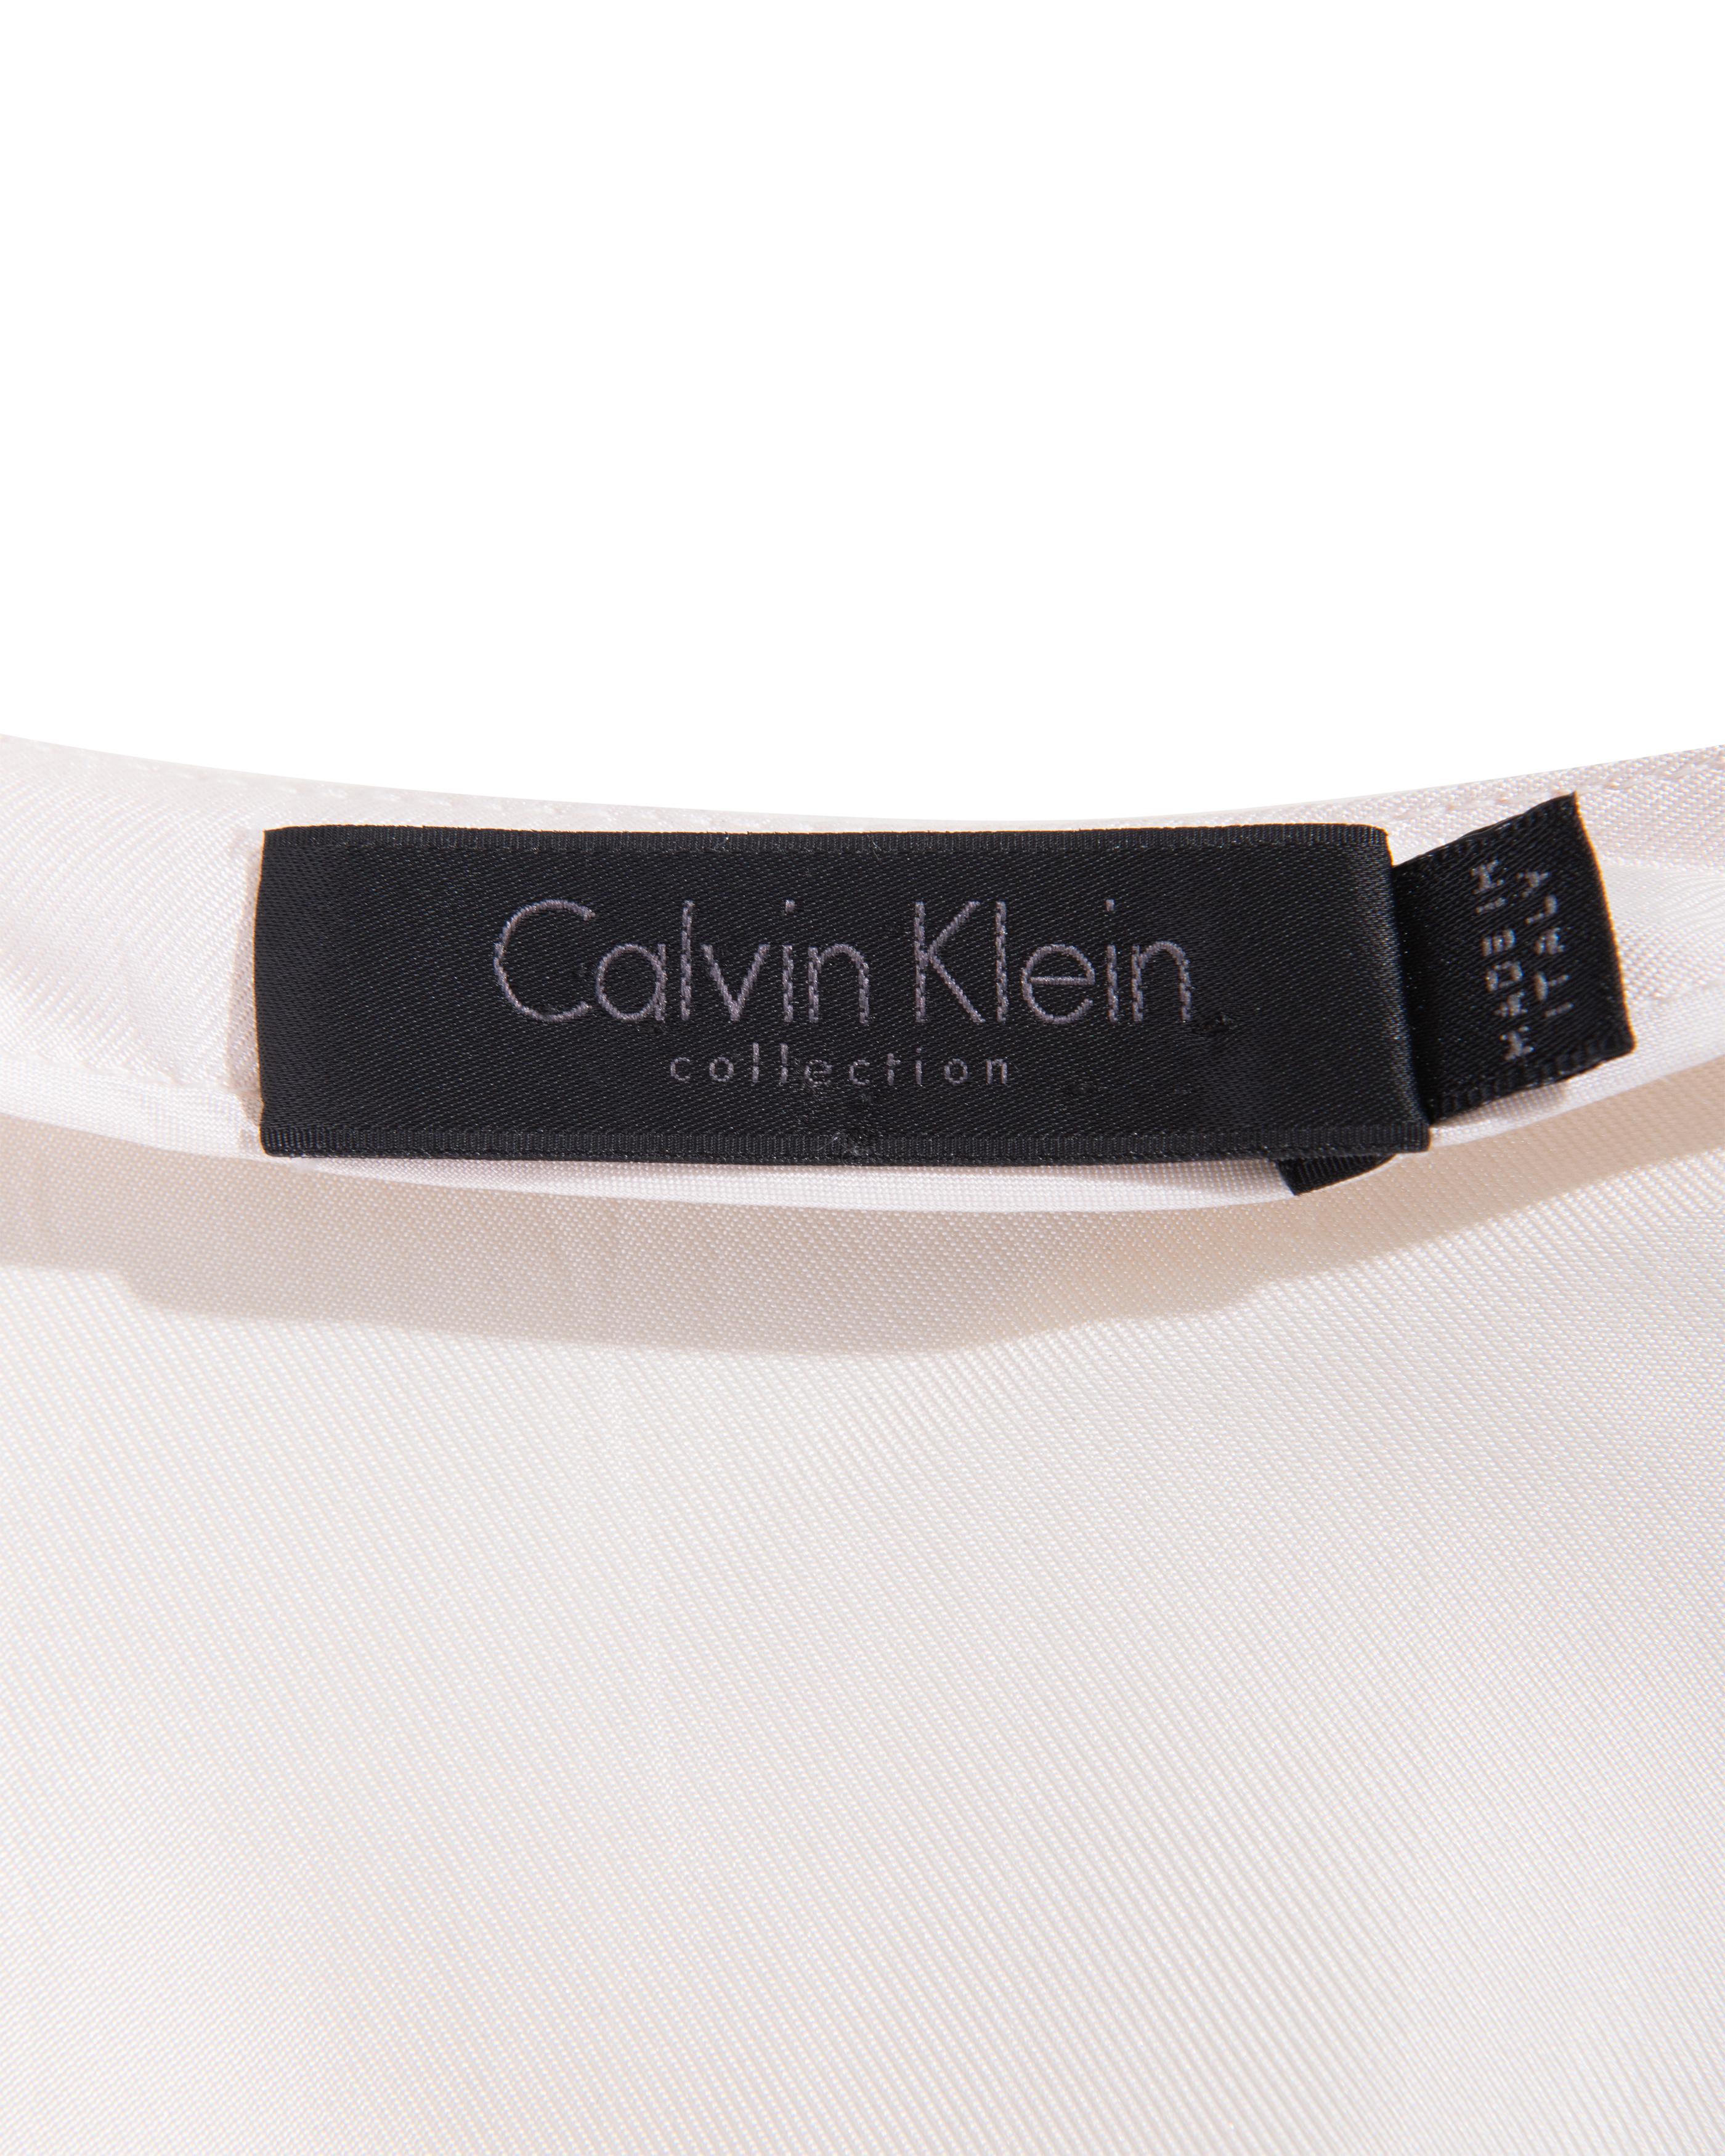 S/S 2016 Calvin Klein White Silk Gown with Bronze Loop Side Details For Sale 2